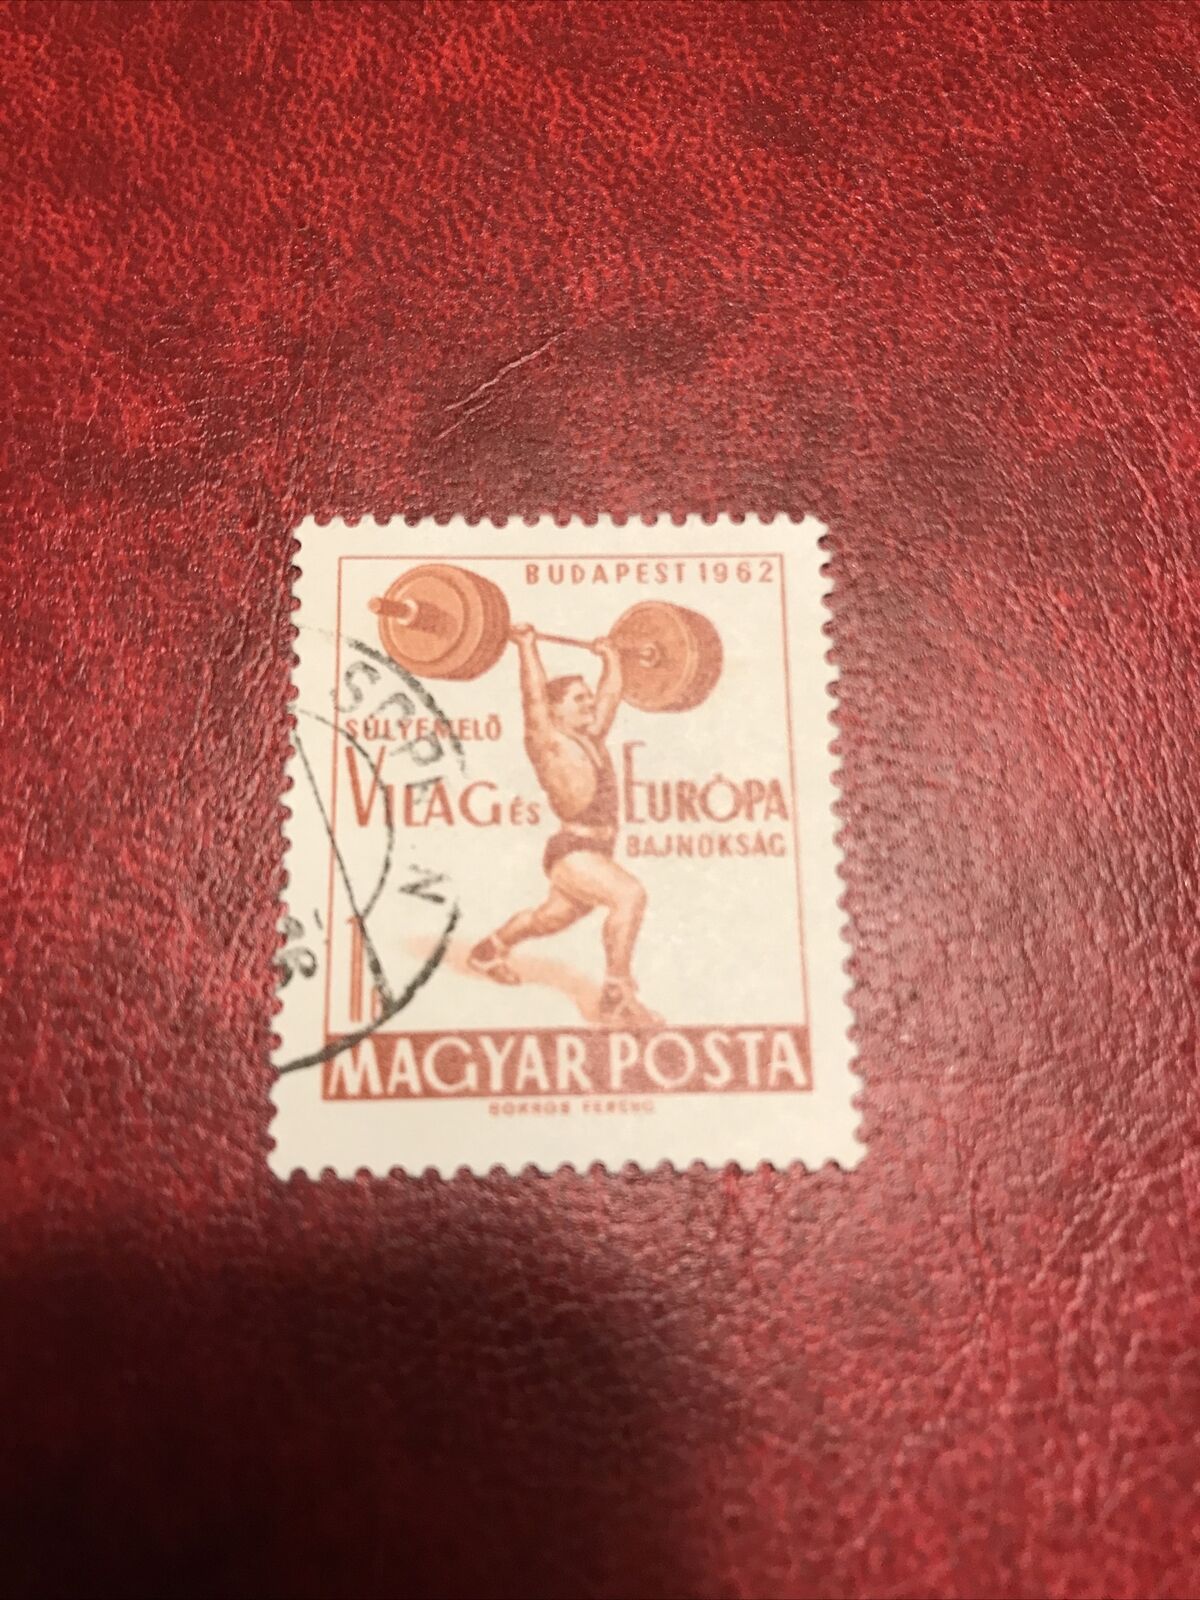 Hungary Oklahoma City Mall Stamps 1962 USED Weightlifting European Topics on TV Championship